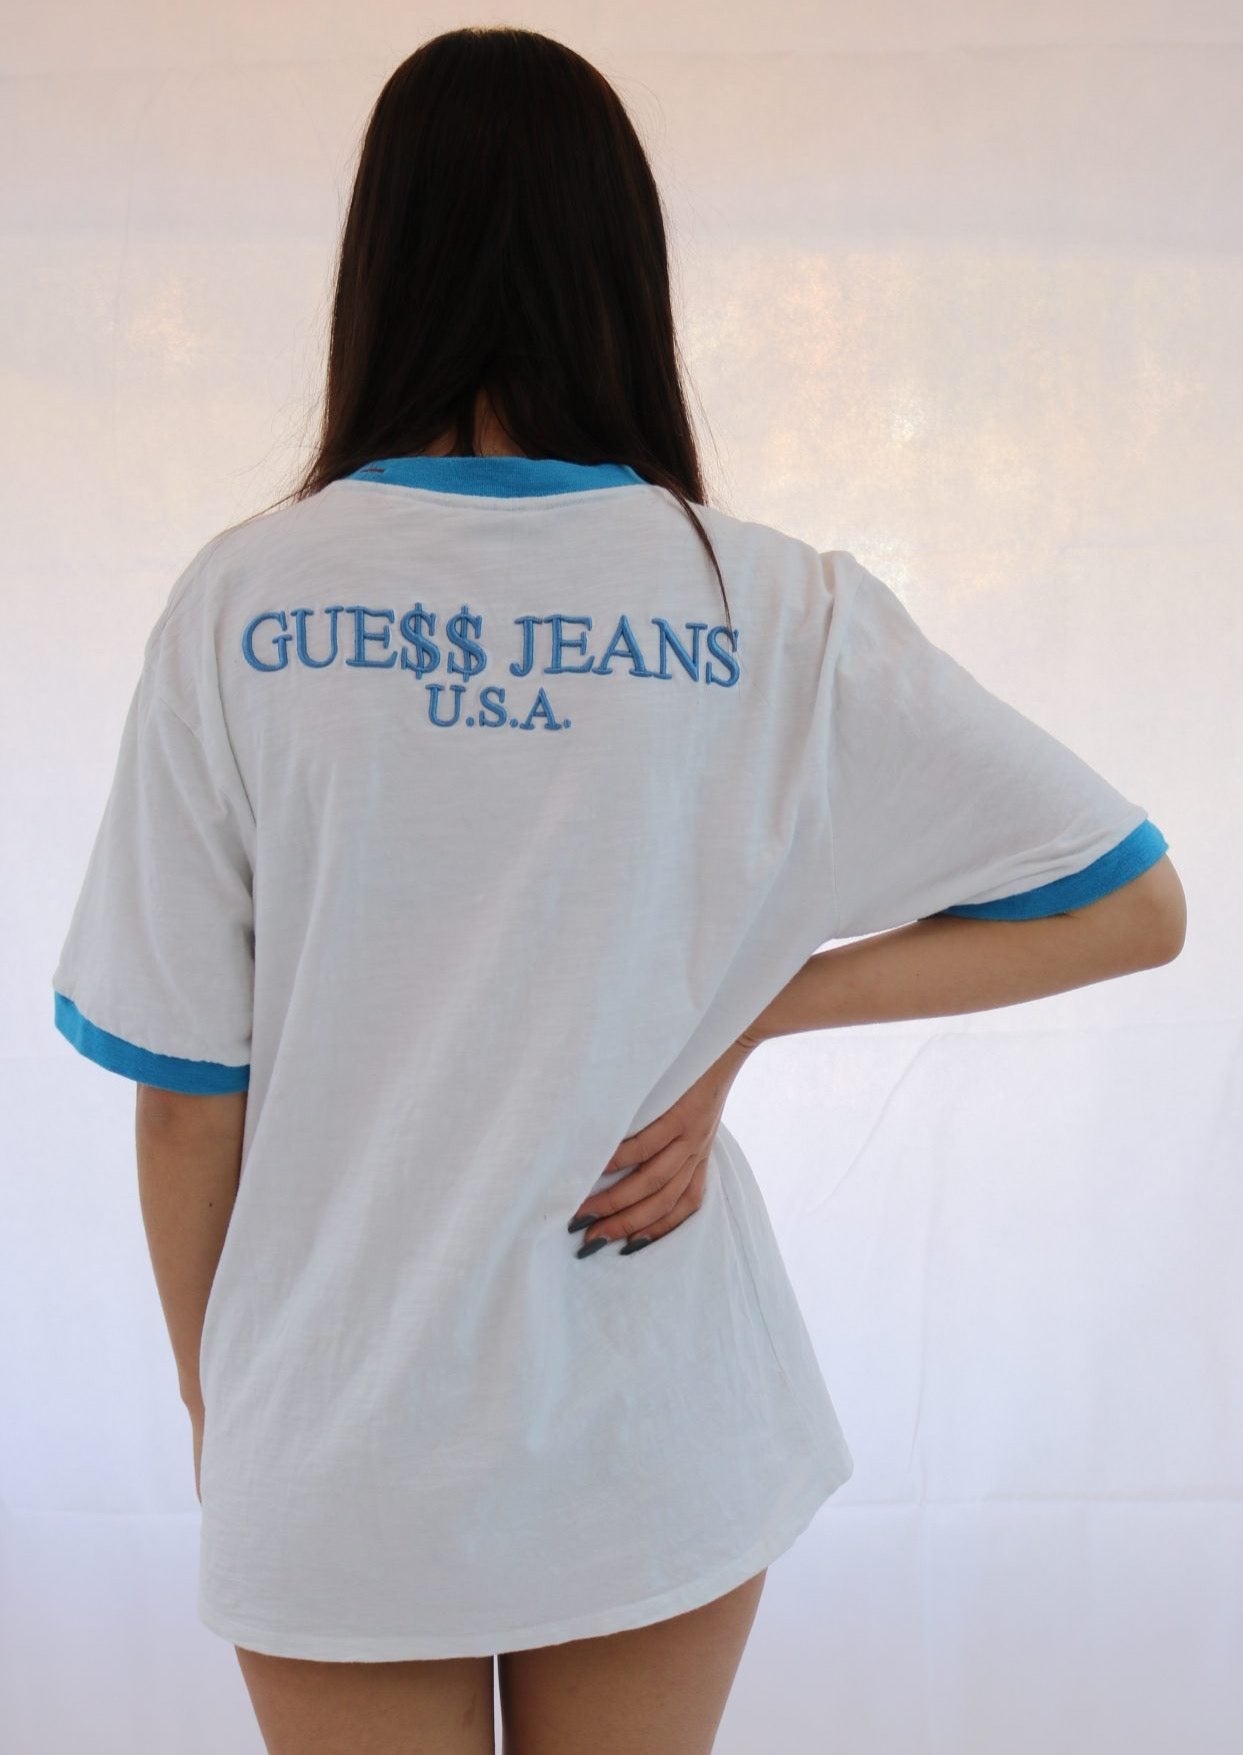 guess jeans usa vintage t